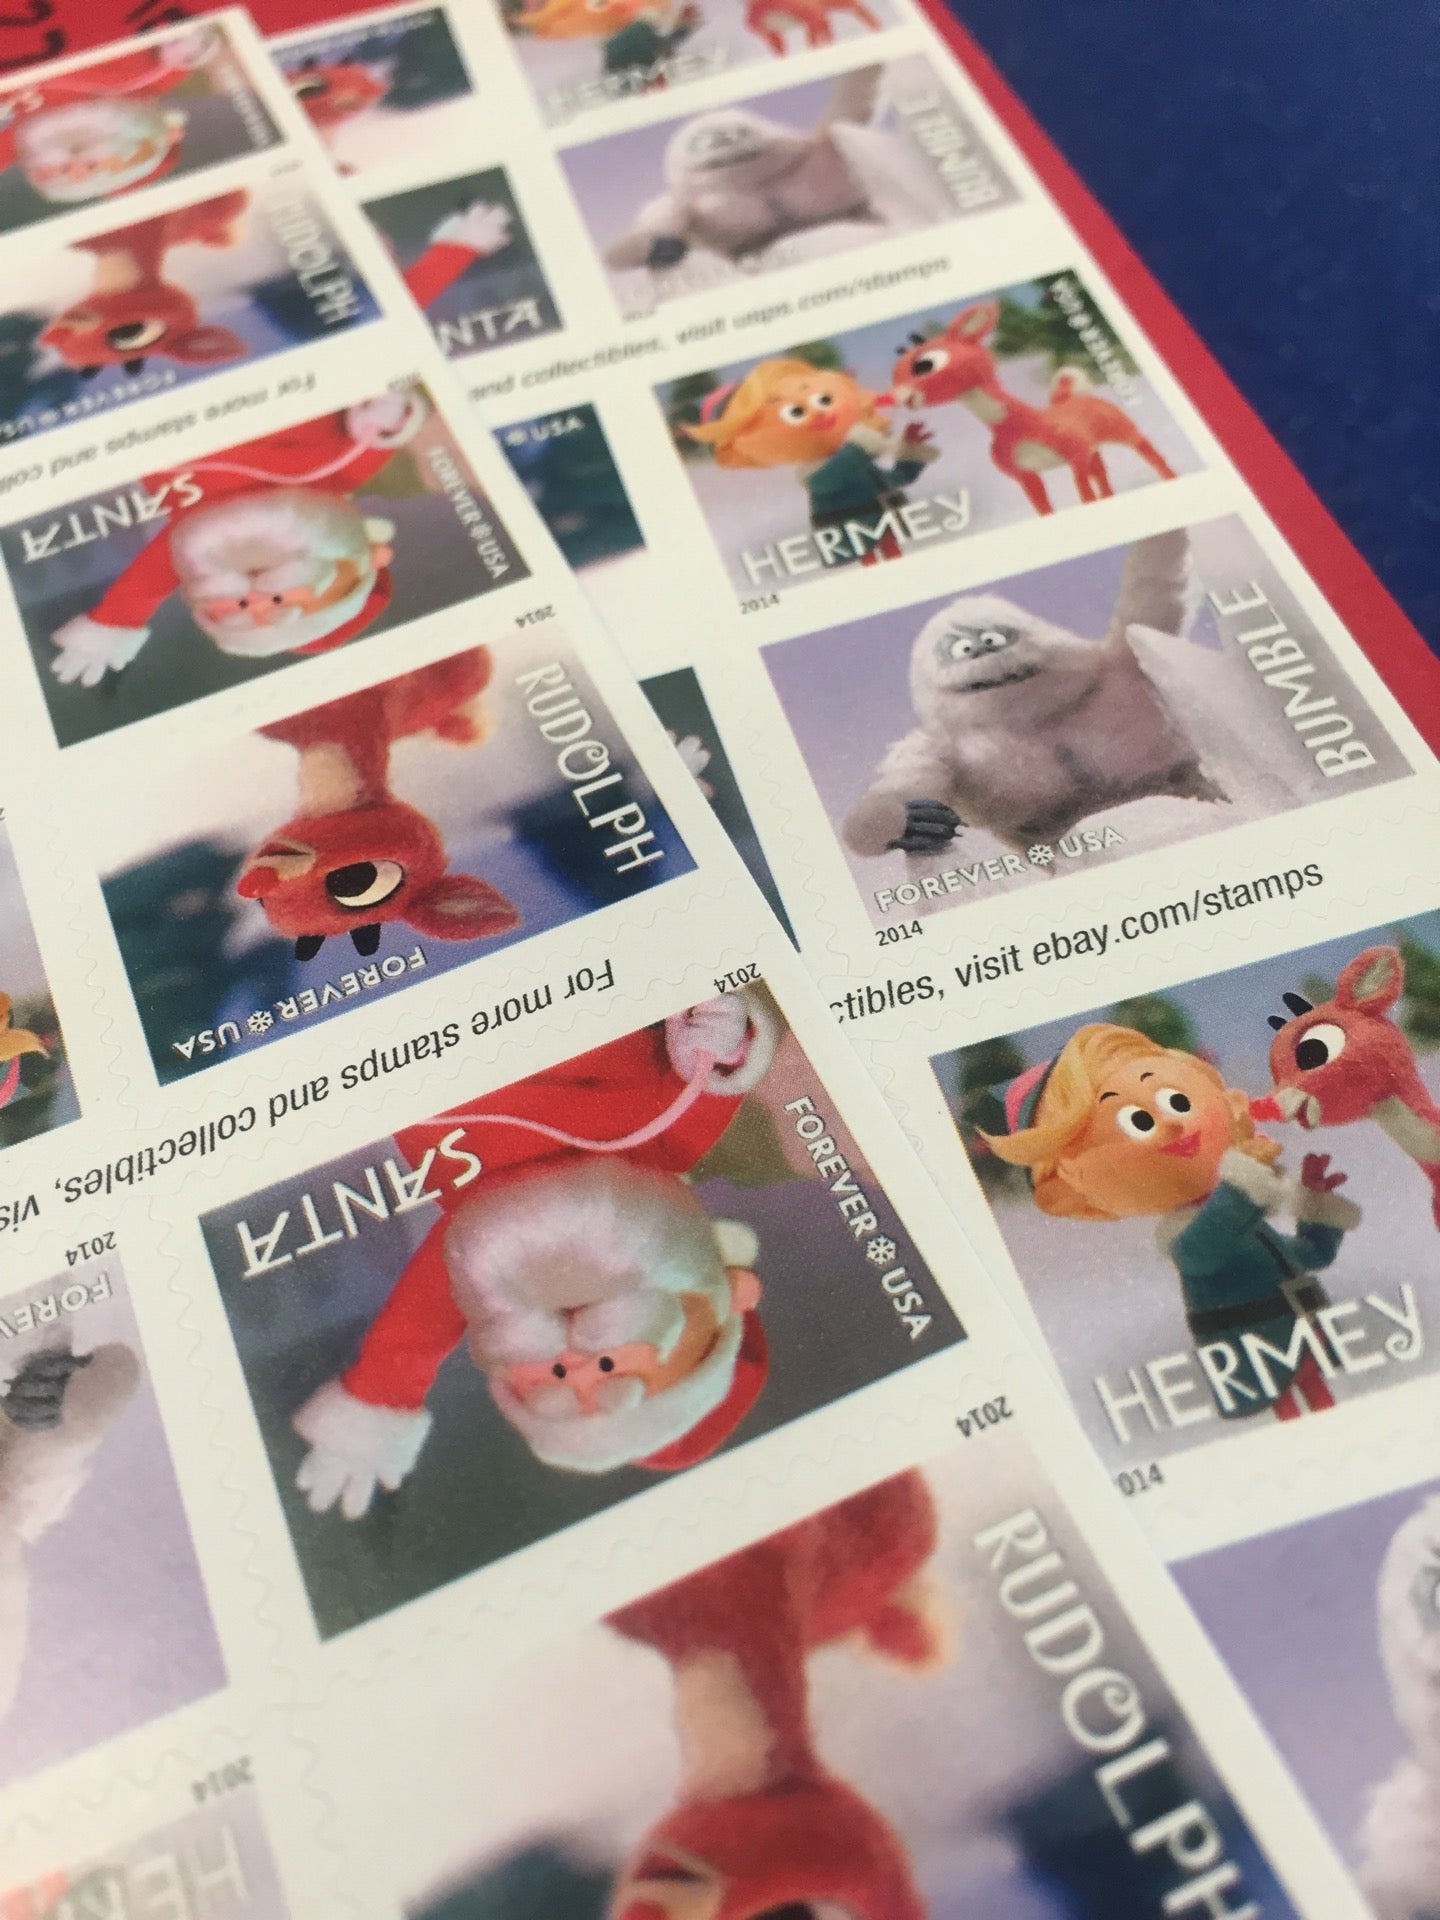 Rudolph The Red-Nosed Reindeer 2014 New Issue USPS Forever Stamps - Book of 20